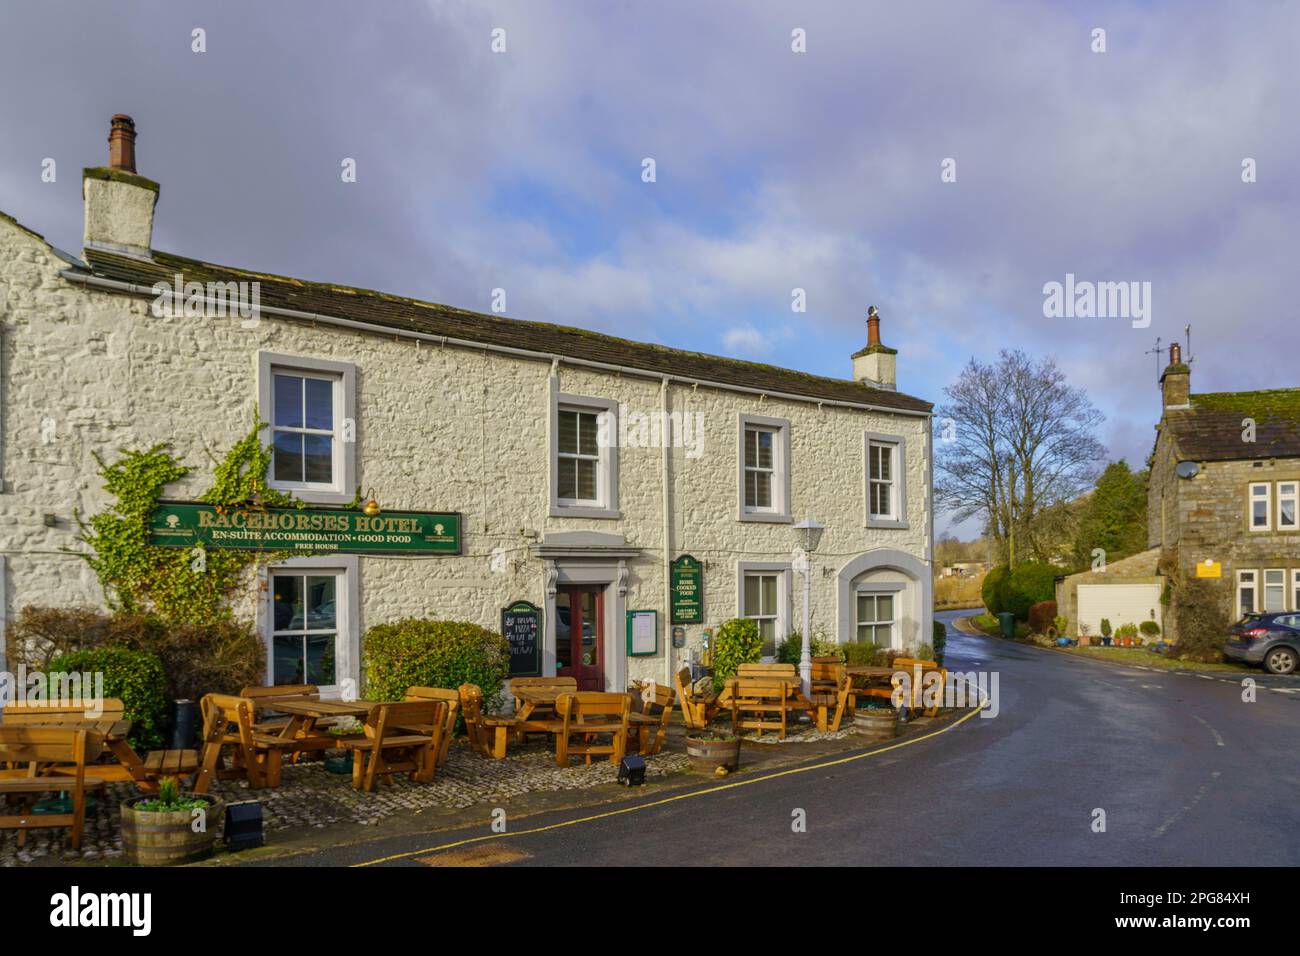 Racehorses Hotel in Kettlewell, Skipton, Upper Nidderdale, North Yorkshire, UK, with wooden tables and chairs lining the front. Stock Photo